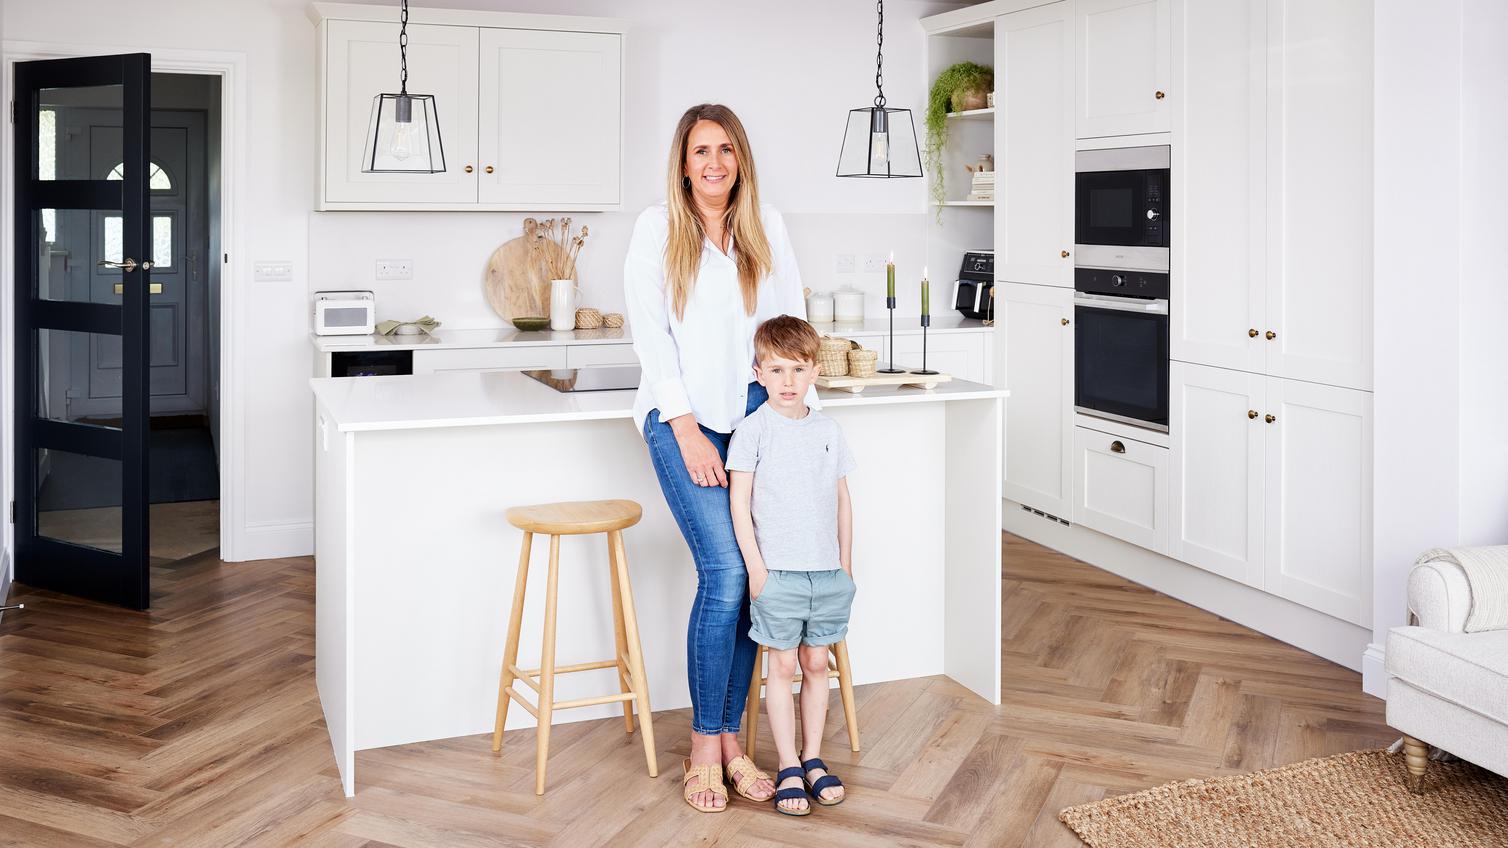 Serena and her son posing in their new Halesworth kitchen